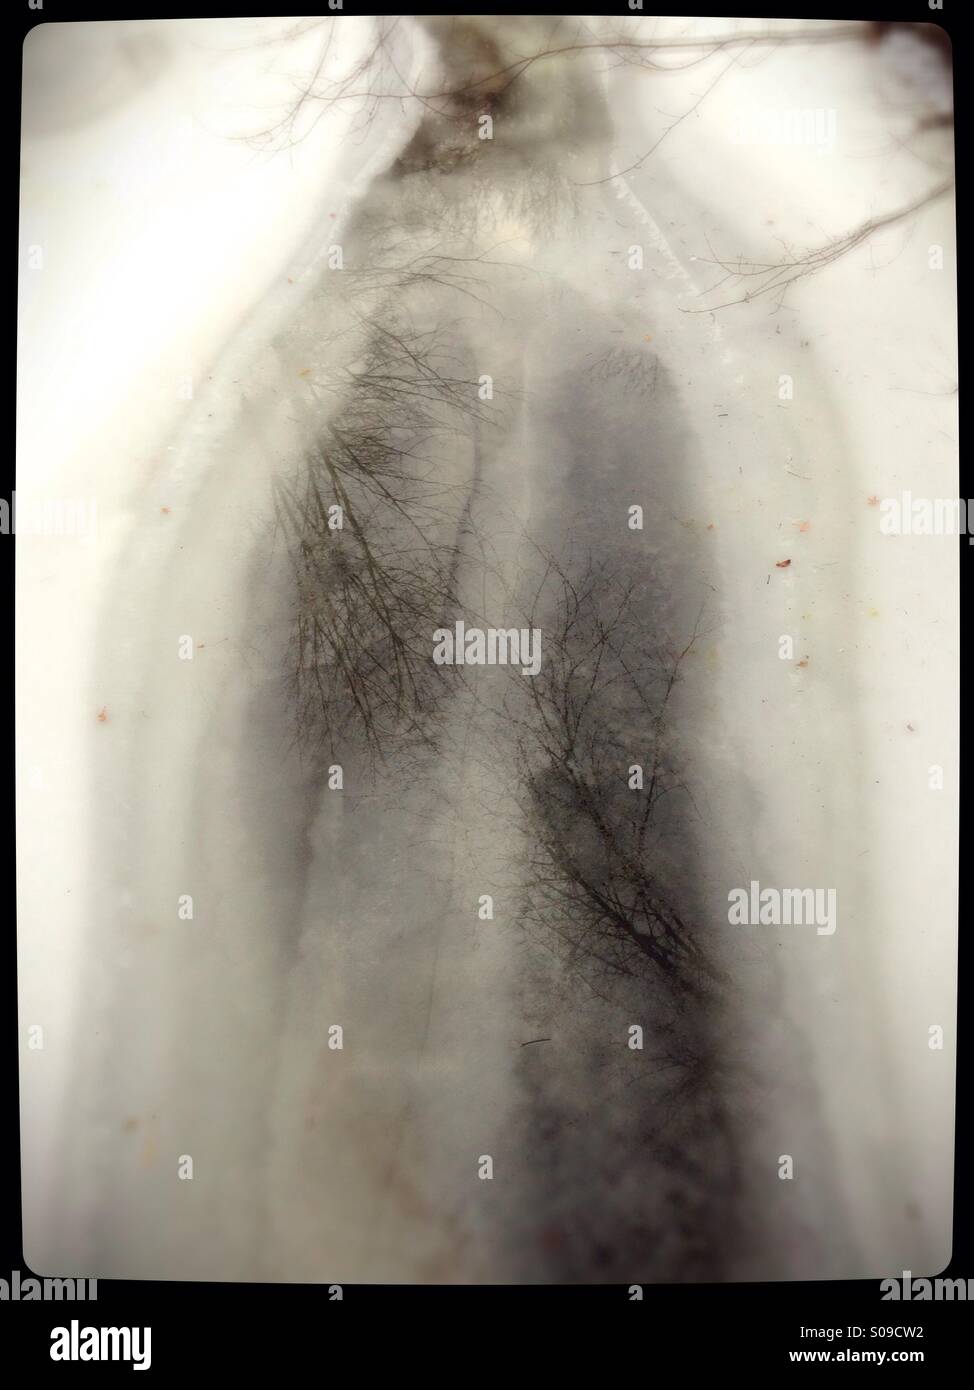 A section of a semi-frozen creek that looks like a chest xray. Stock Photo